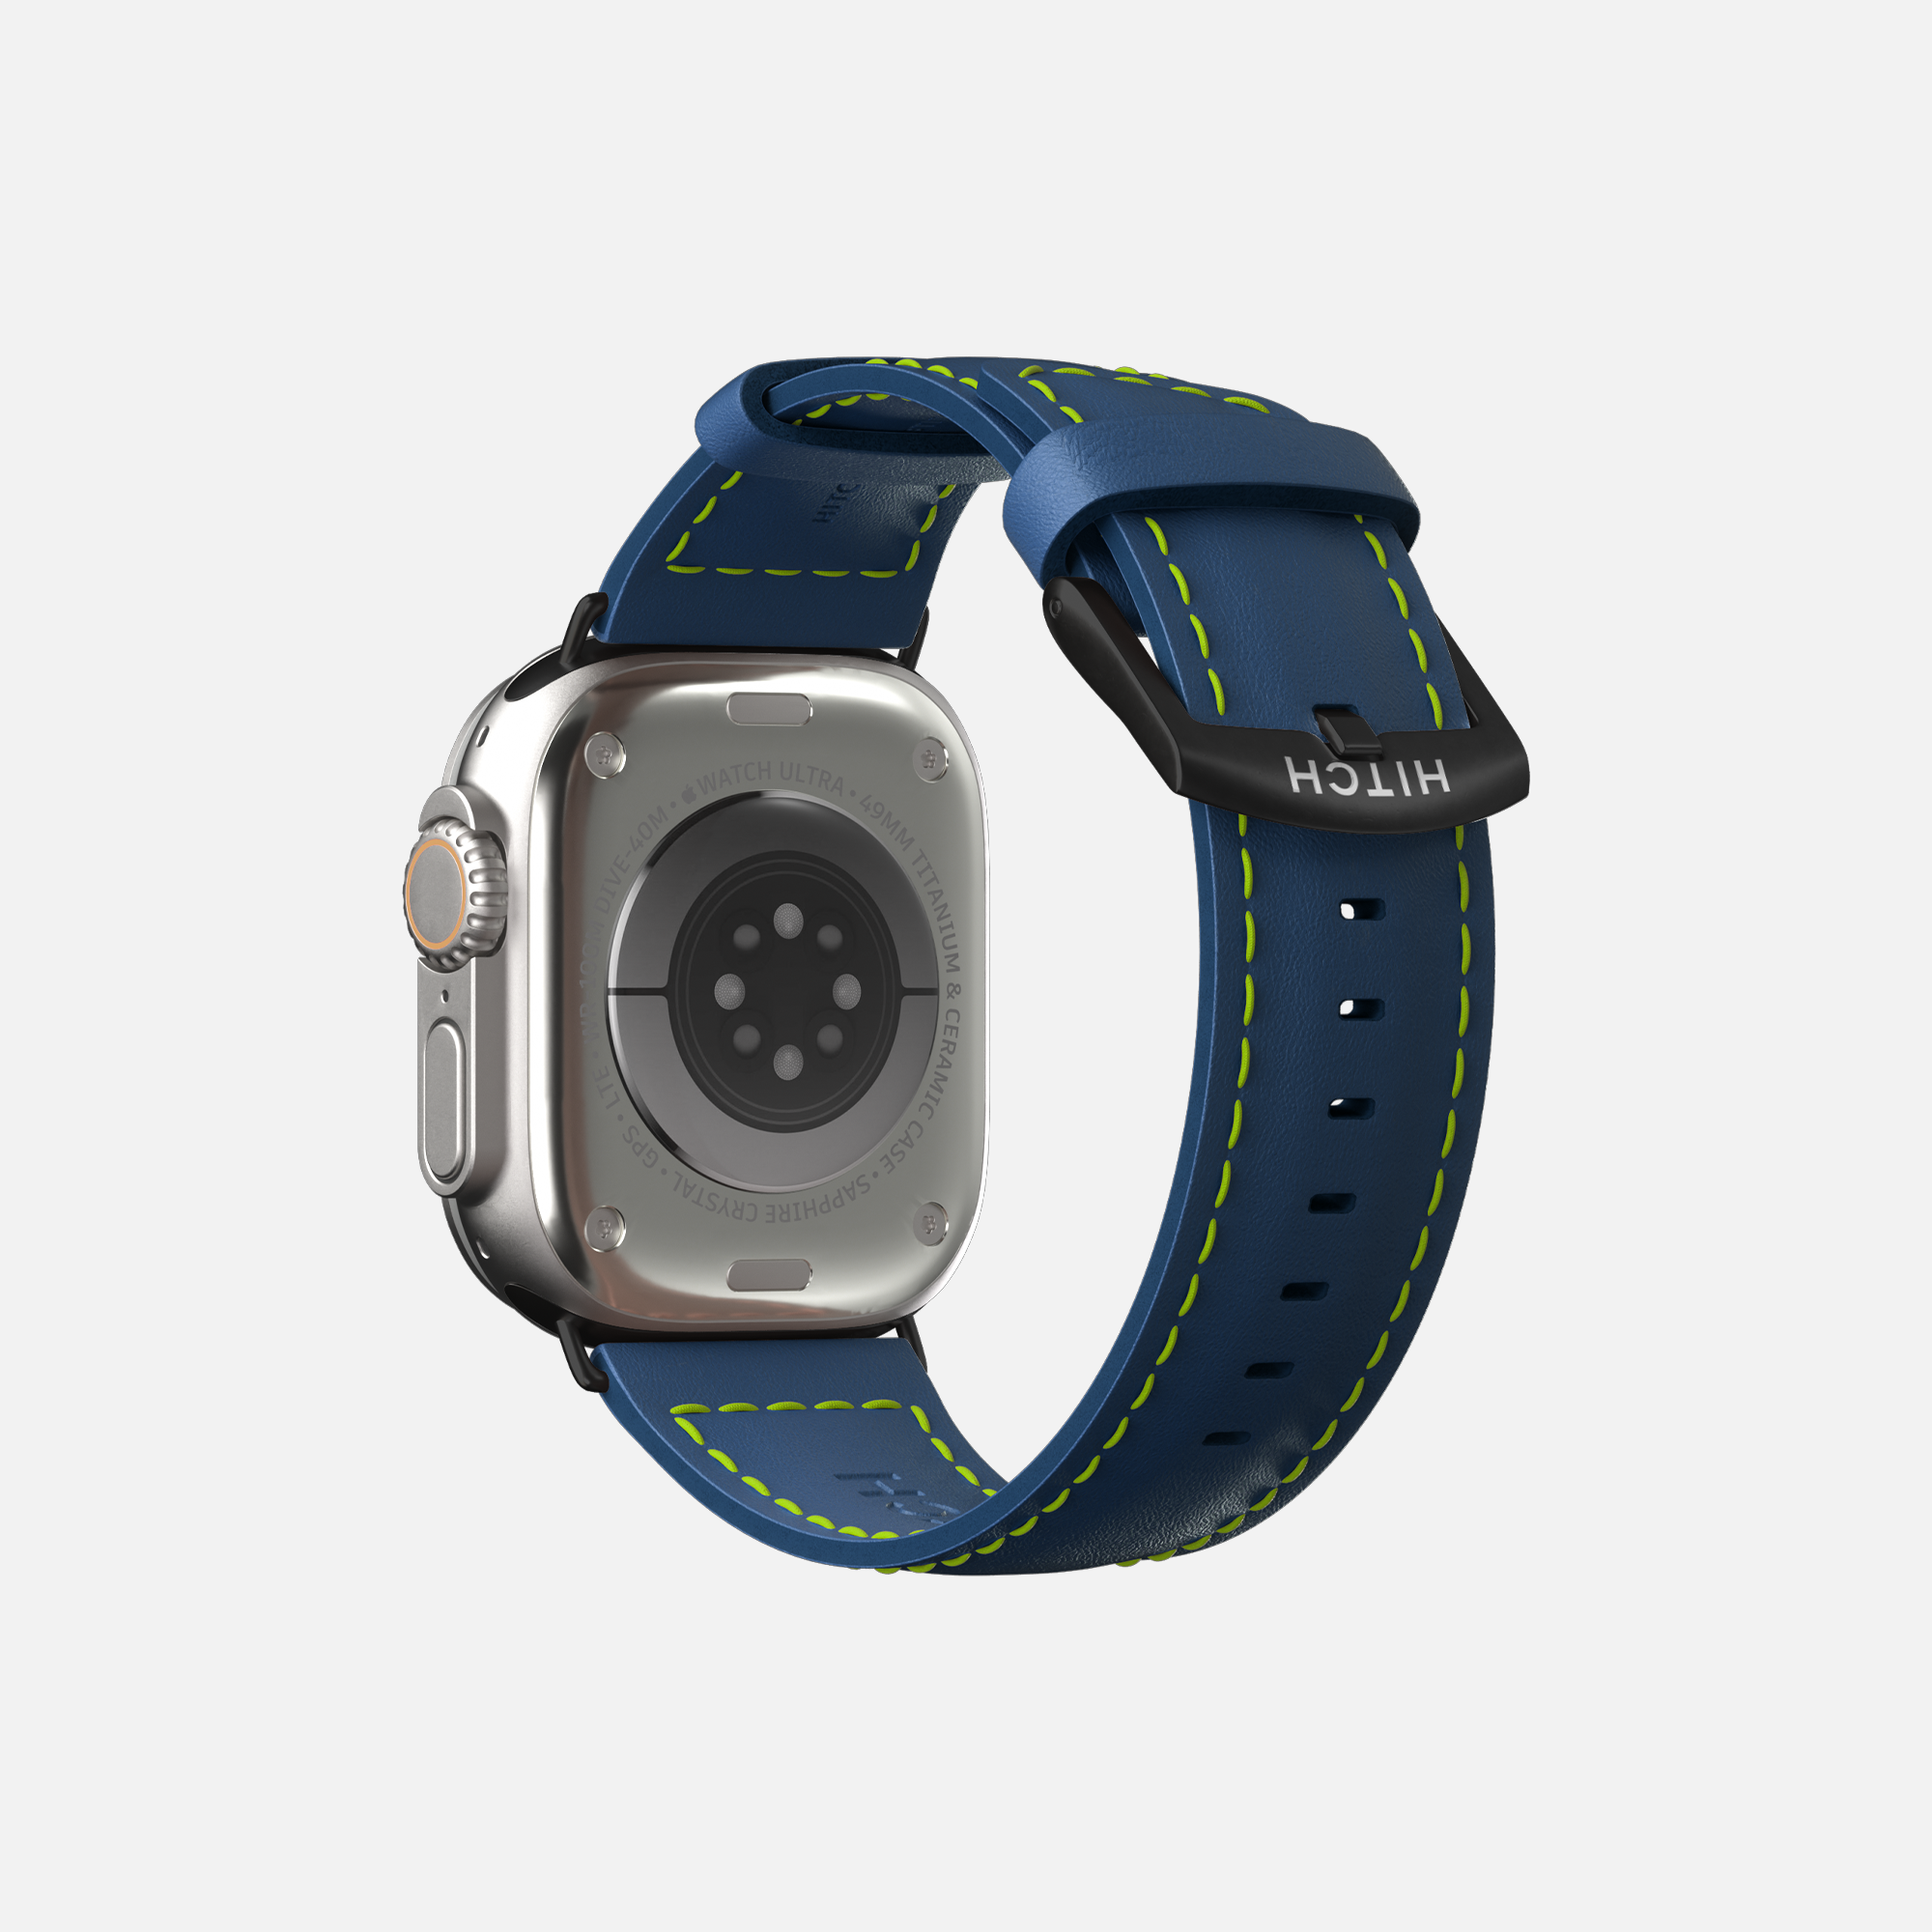 Rear view of a silver Apple smartwatch with blue and neon green sport band on white background.